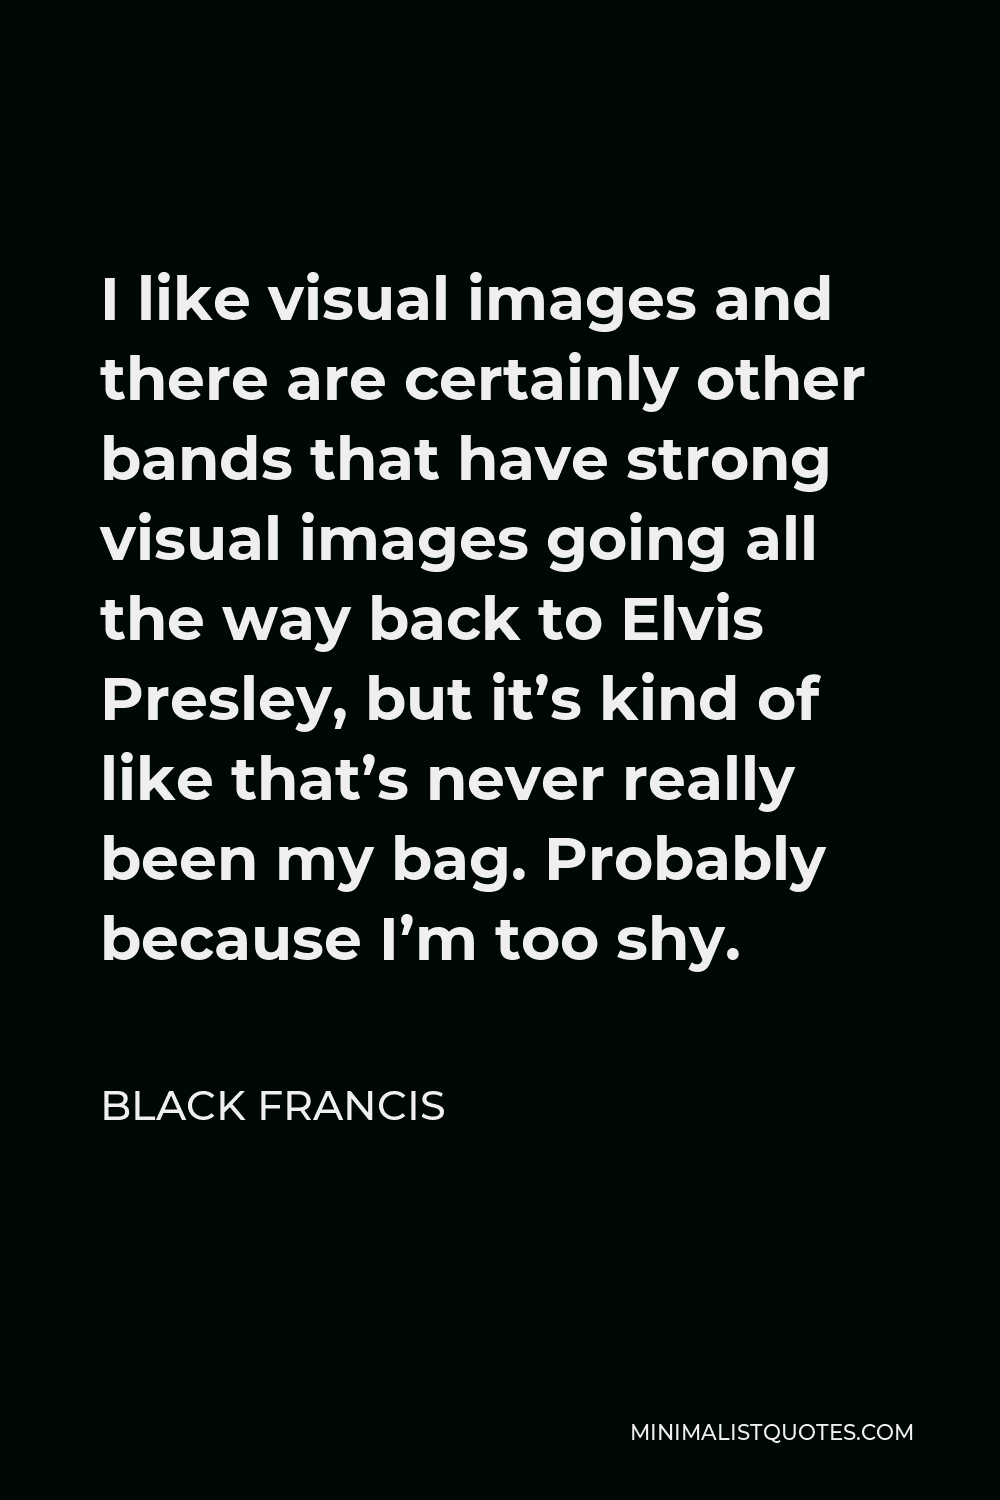 Black Francis Quote - I like visual images and there are certainly other bands that have strong visual images going all the way back to Elvis Presley, but it’s kind of like that’s never really been my bag. Probably because I’m too shy.